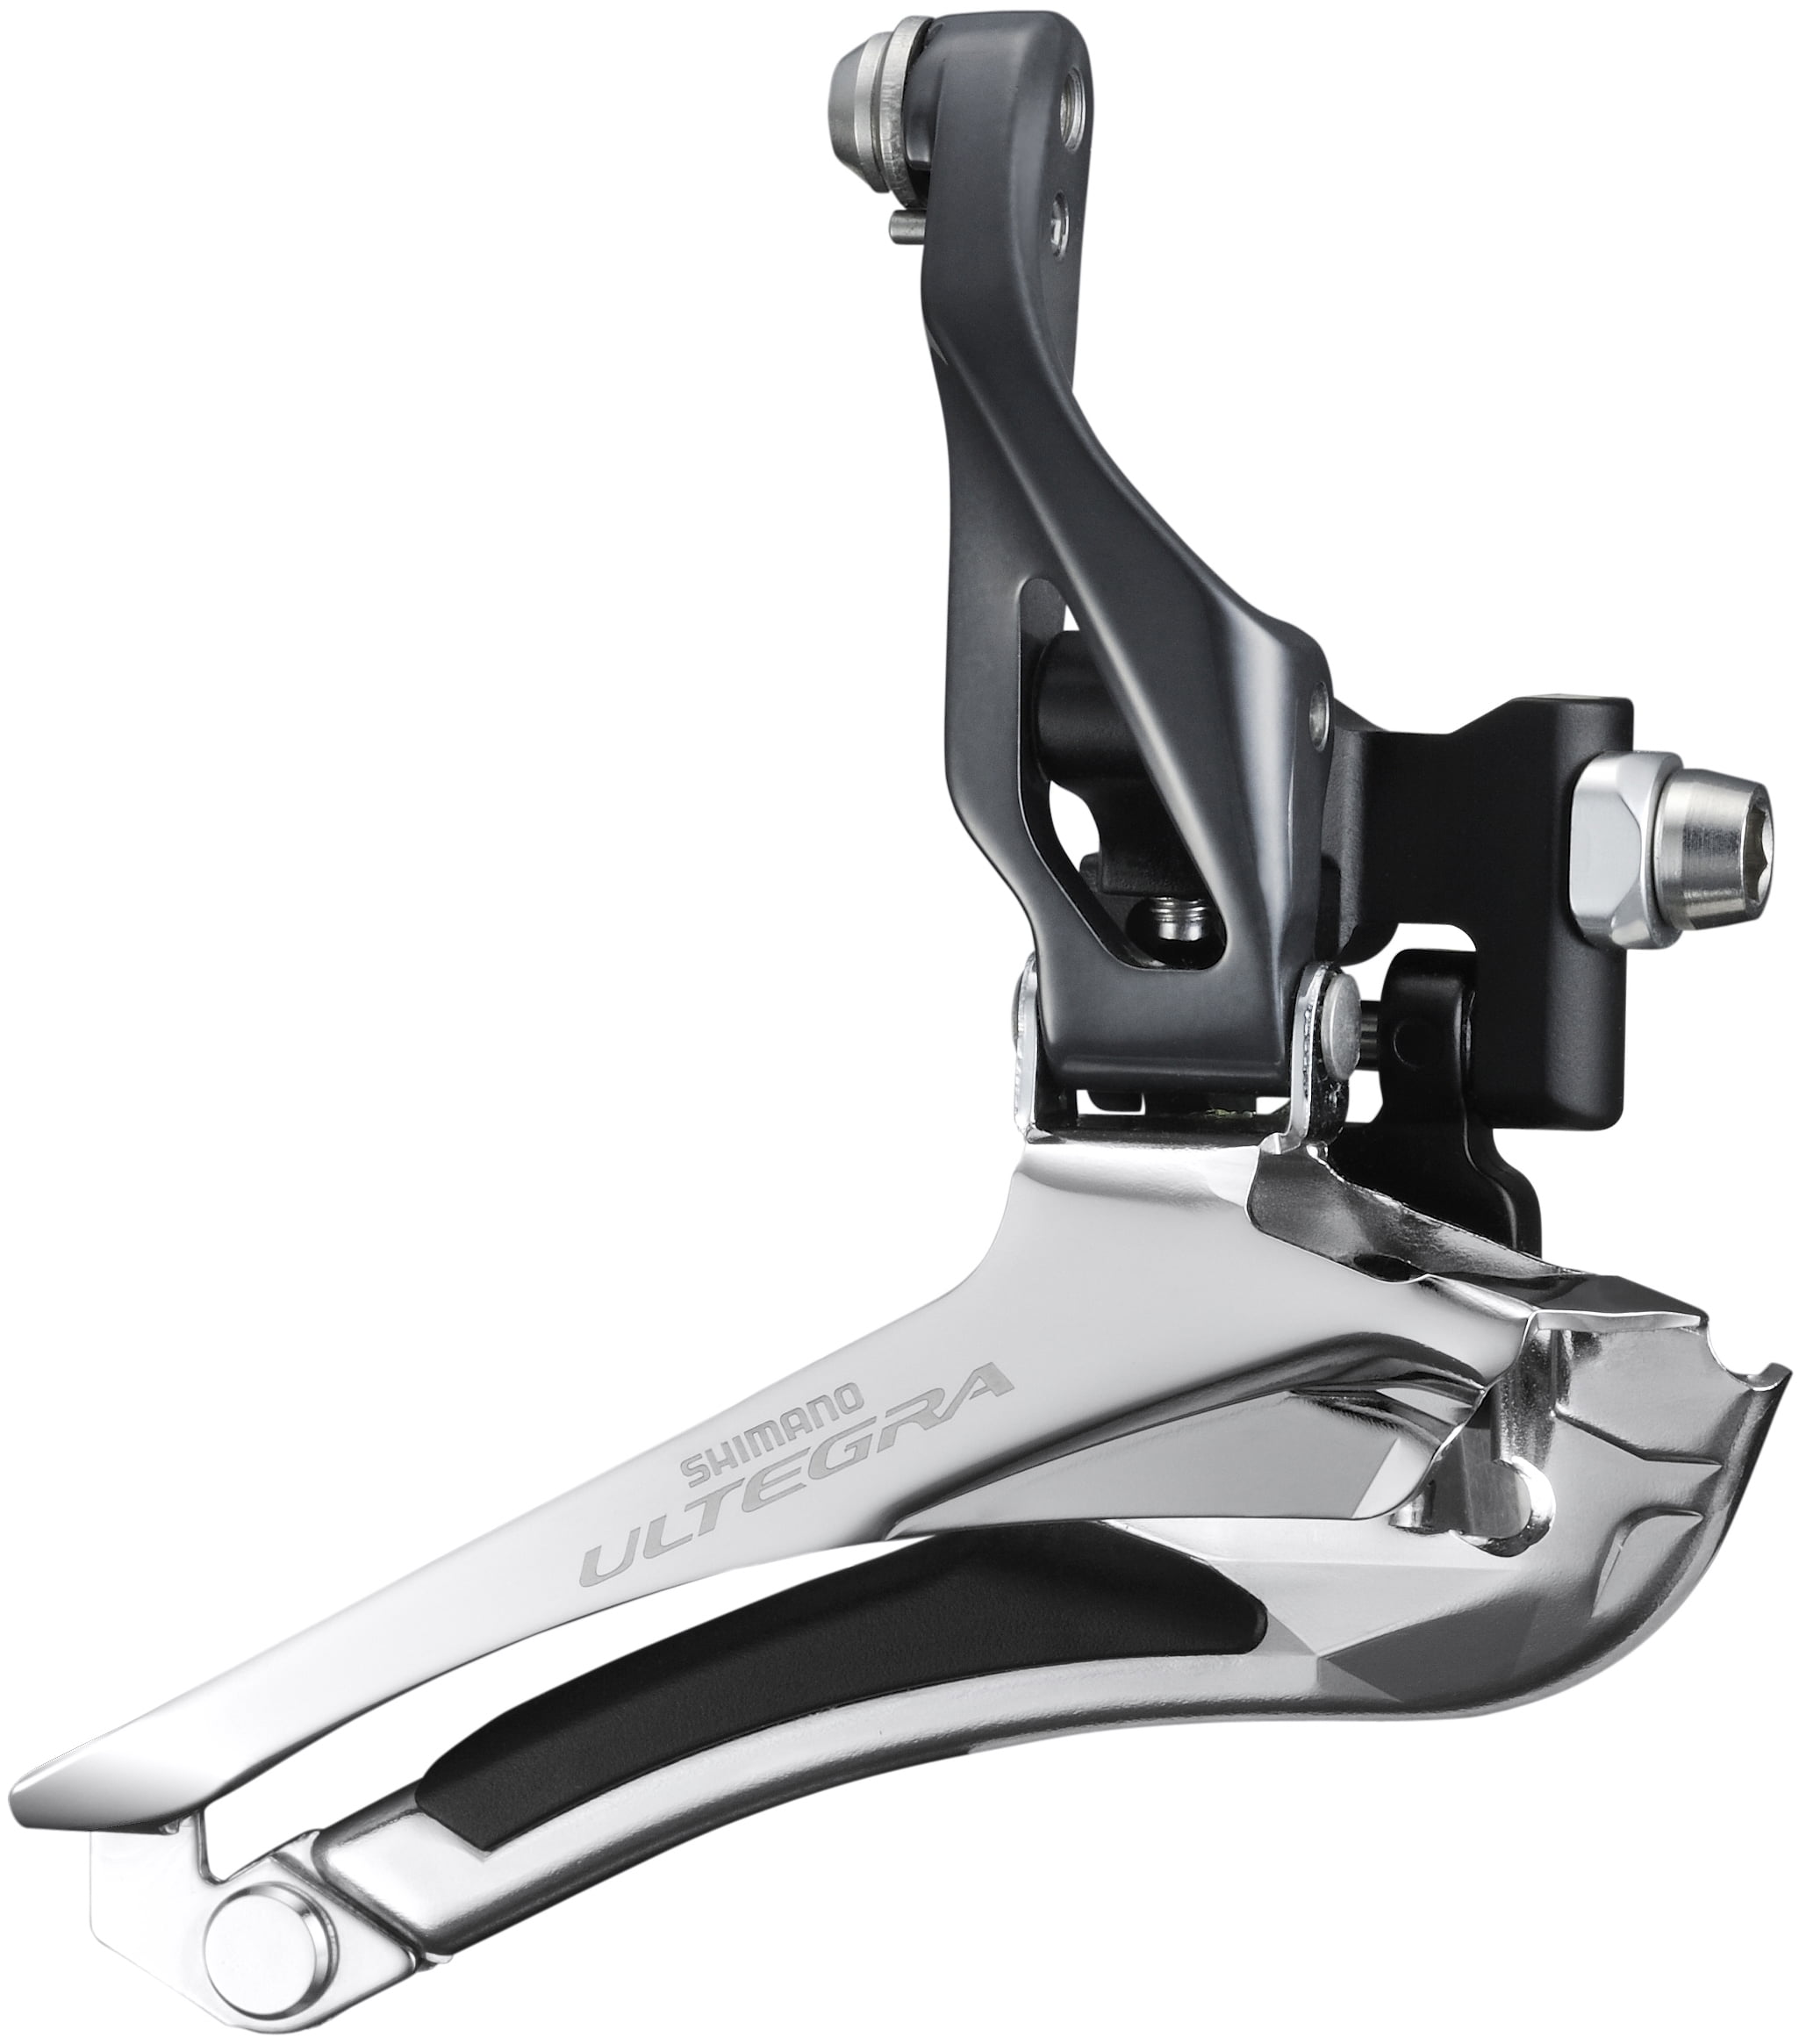 Braze on front derailleur. It is bolted onto a braze on derailleur holder on a frame.